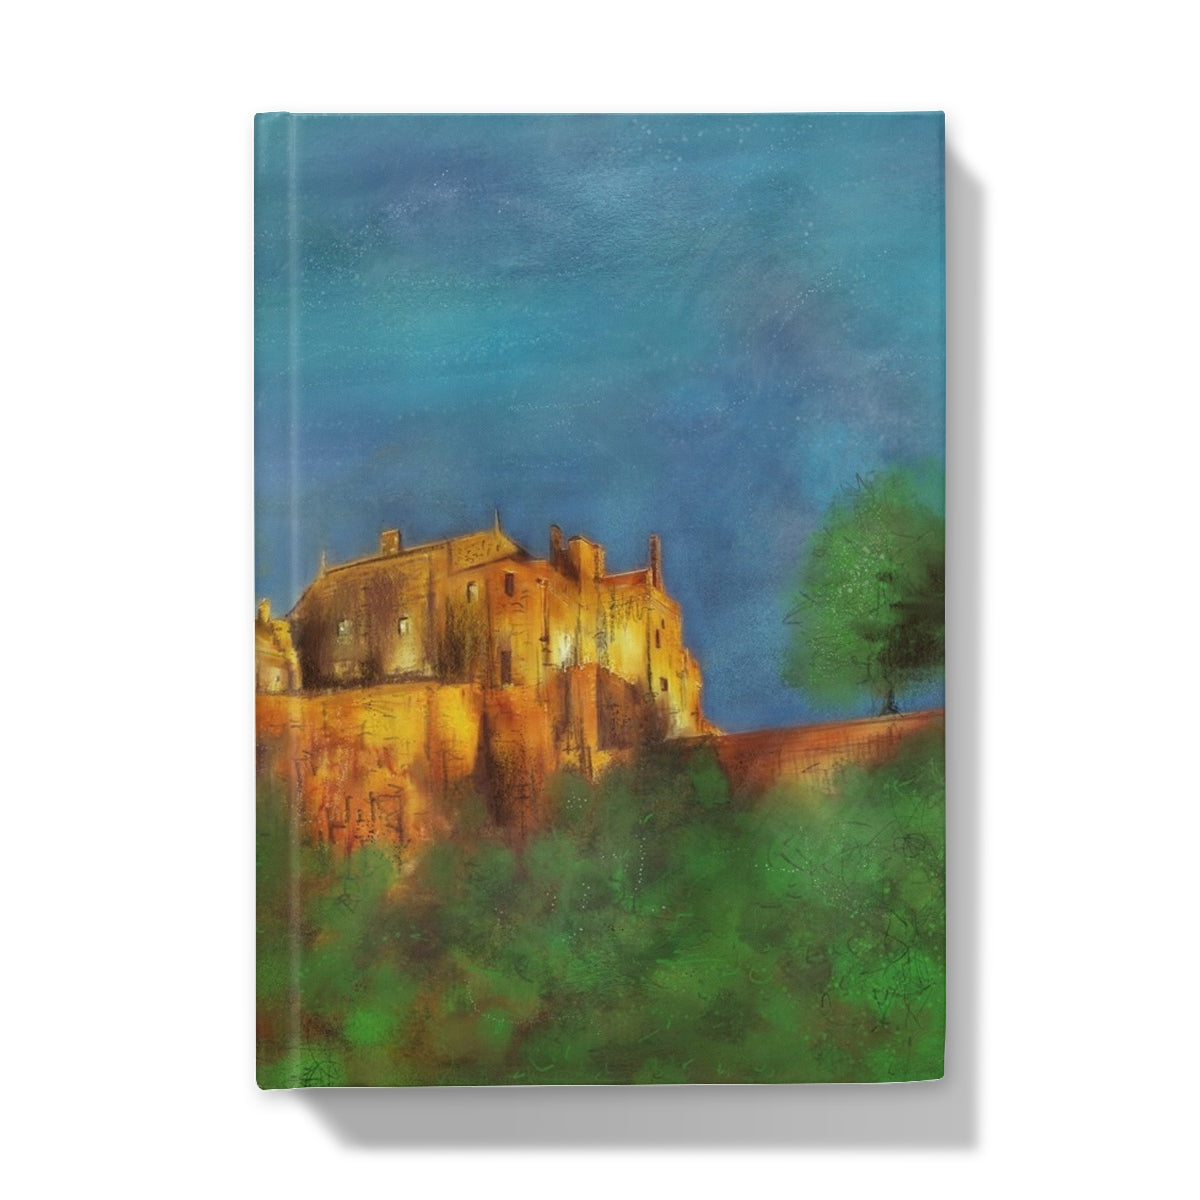 Stirling Castle Art Gifts Hardback Journal-Journals & Notebooks-Historic & Iconic Scotland Art Gallery-A4-Lined-Paintings, Prints, Homeware, Art Gifts From Scotland By Scottish Artist Kevin Hunter